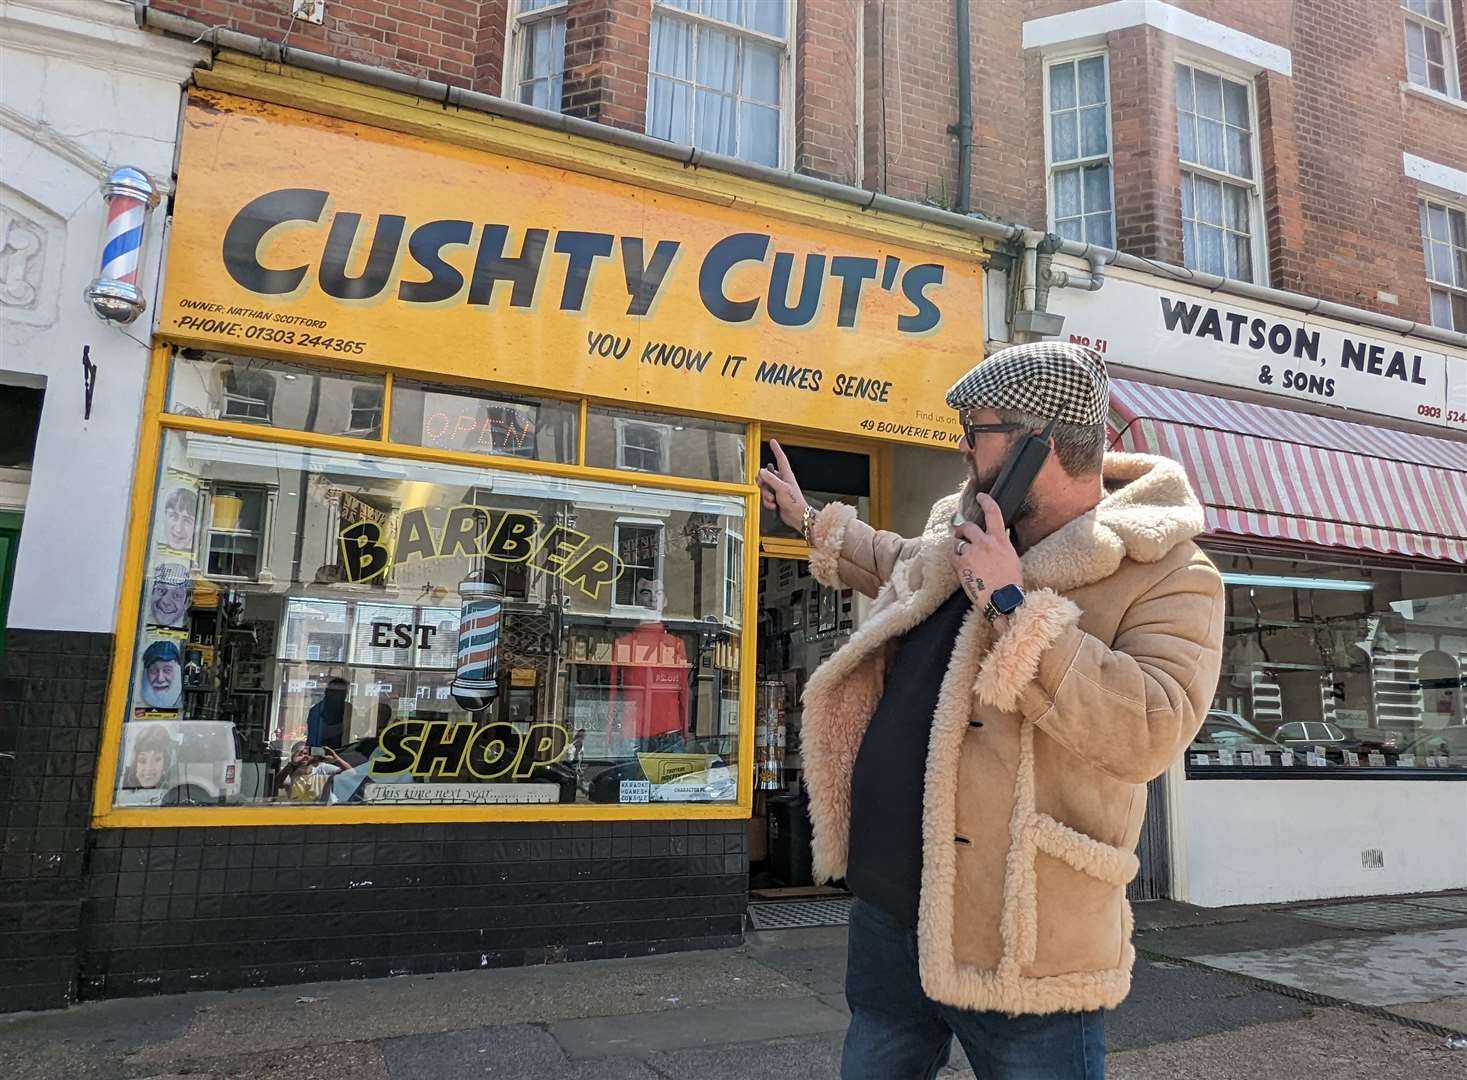 Barber Nathan Scotford has turned his shop into a tribute to the classic sitcom Only Fools and Horses